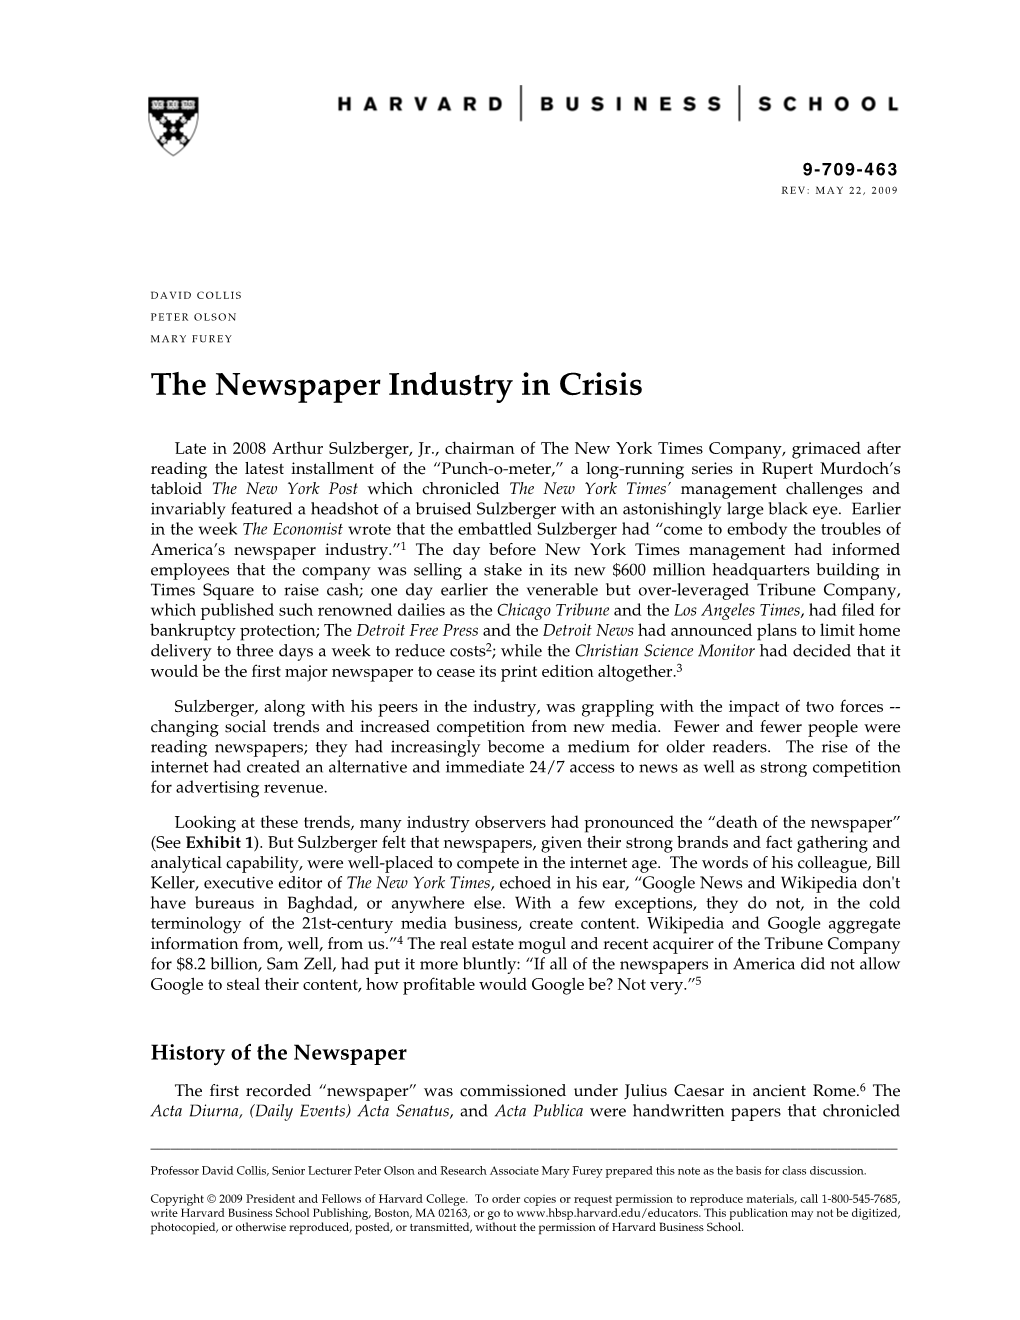 The Newspaper Industry in Crisis